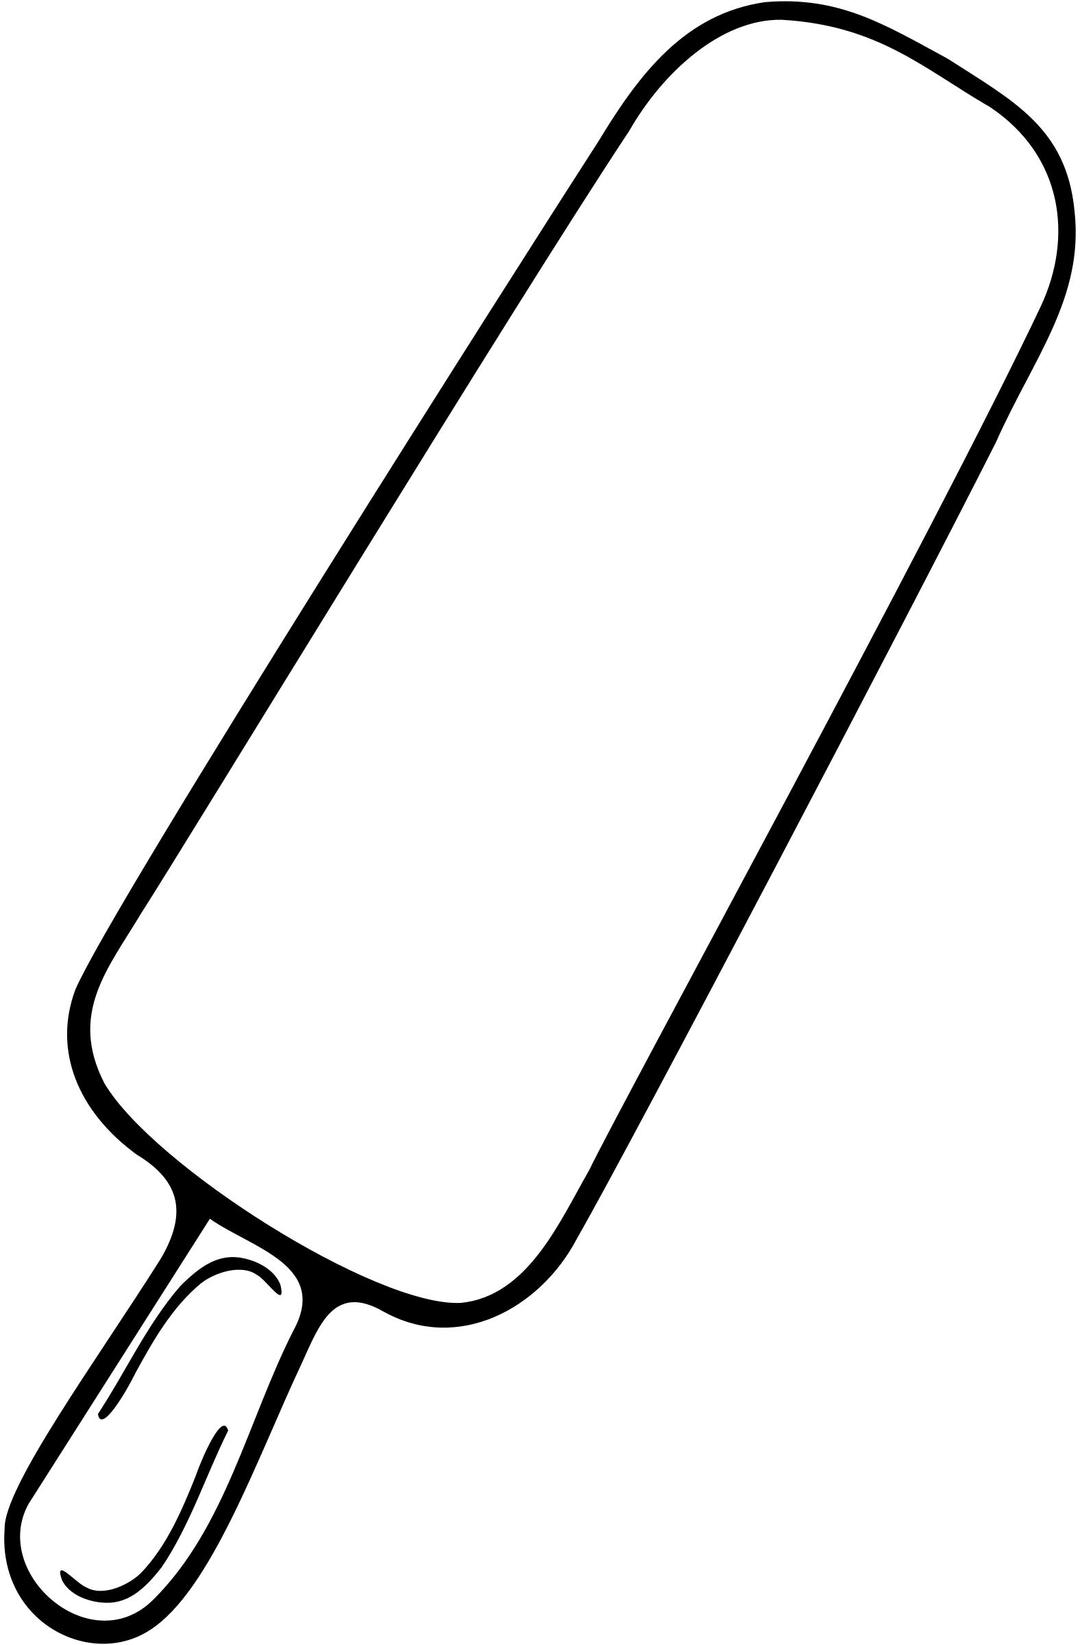 glace-2-bw png transparent